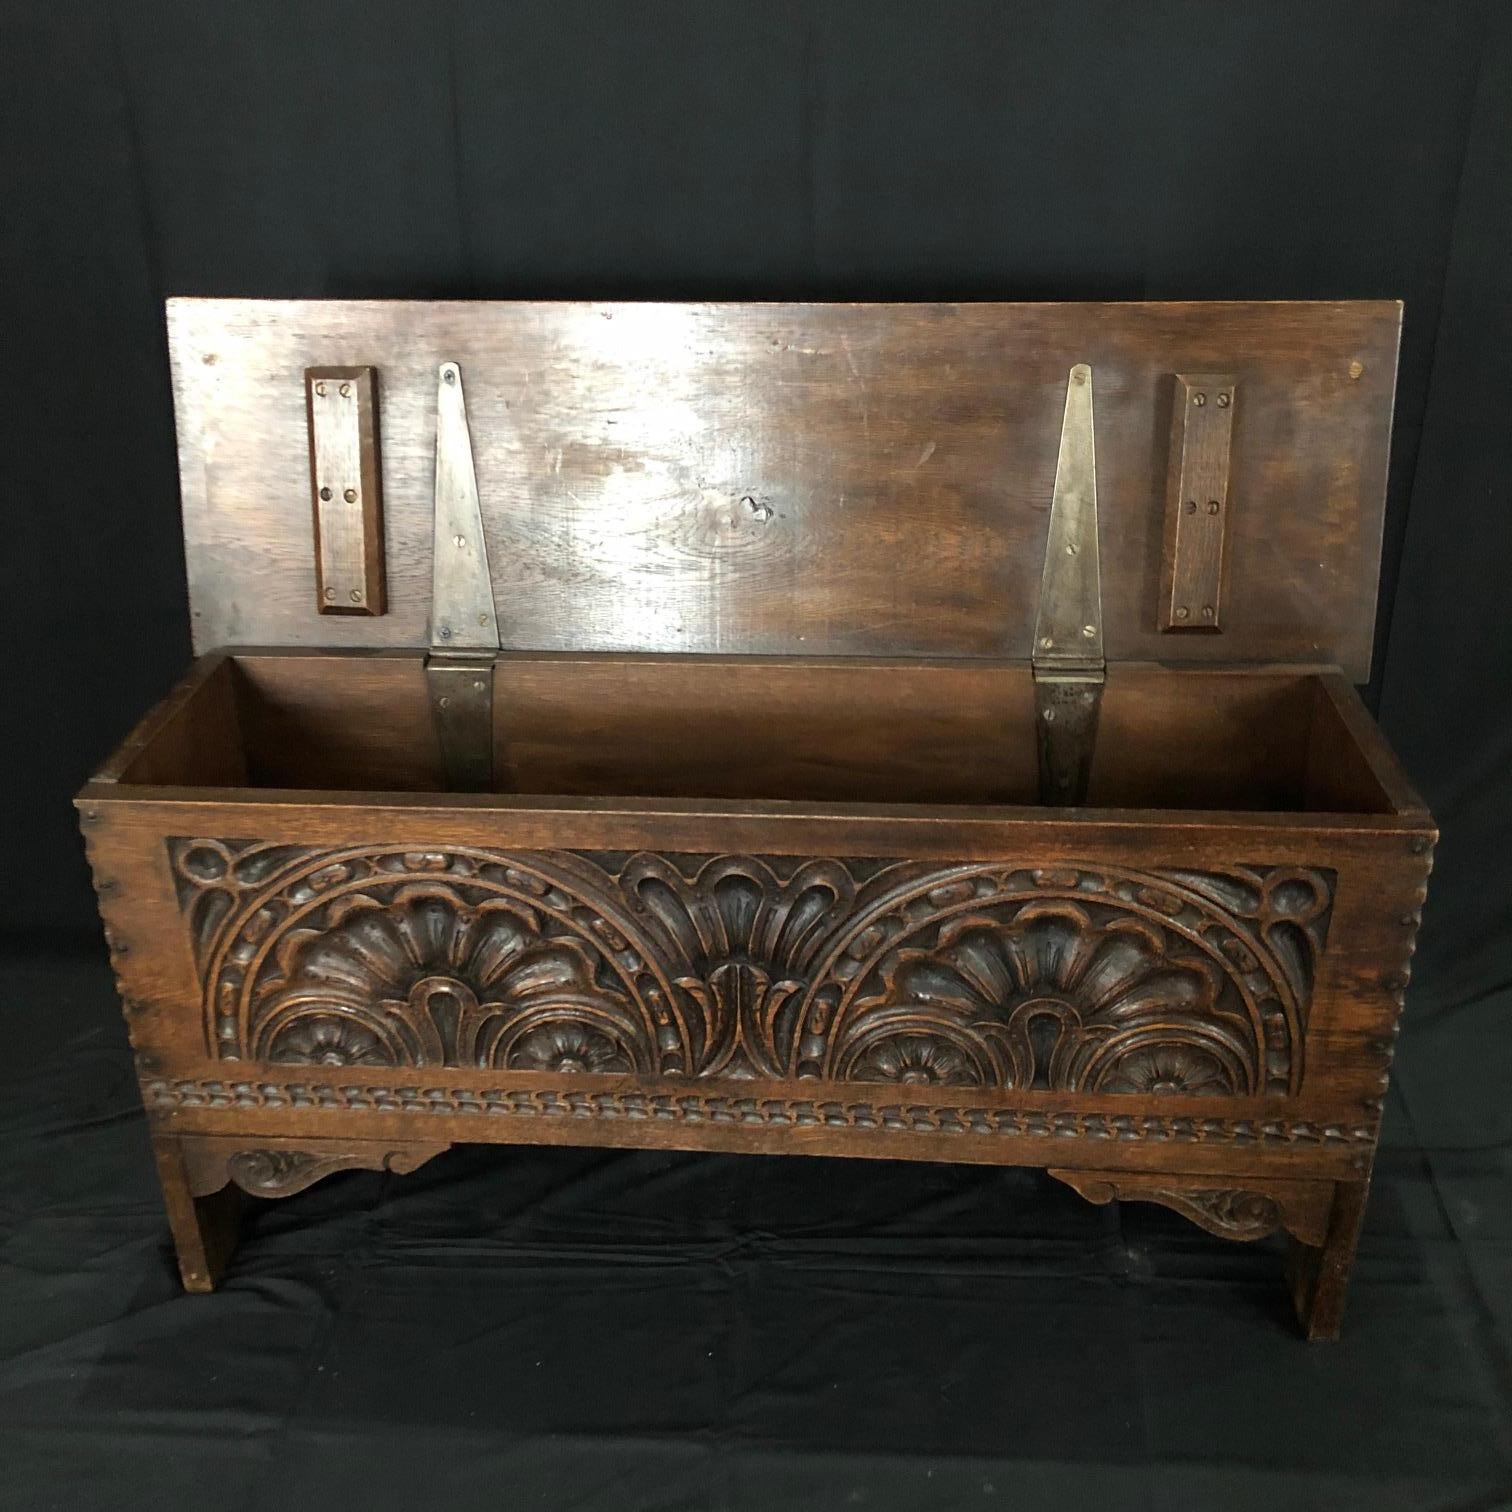 Intricately carved petite French coffer or trunk having smooth surface with very little graining and carved scalloped detail. This nicely proportioned coffer features a lift top revealing a storage area, all resting on carved end feet.
#5117.